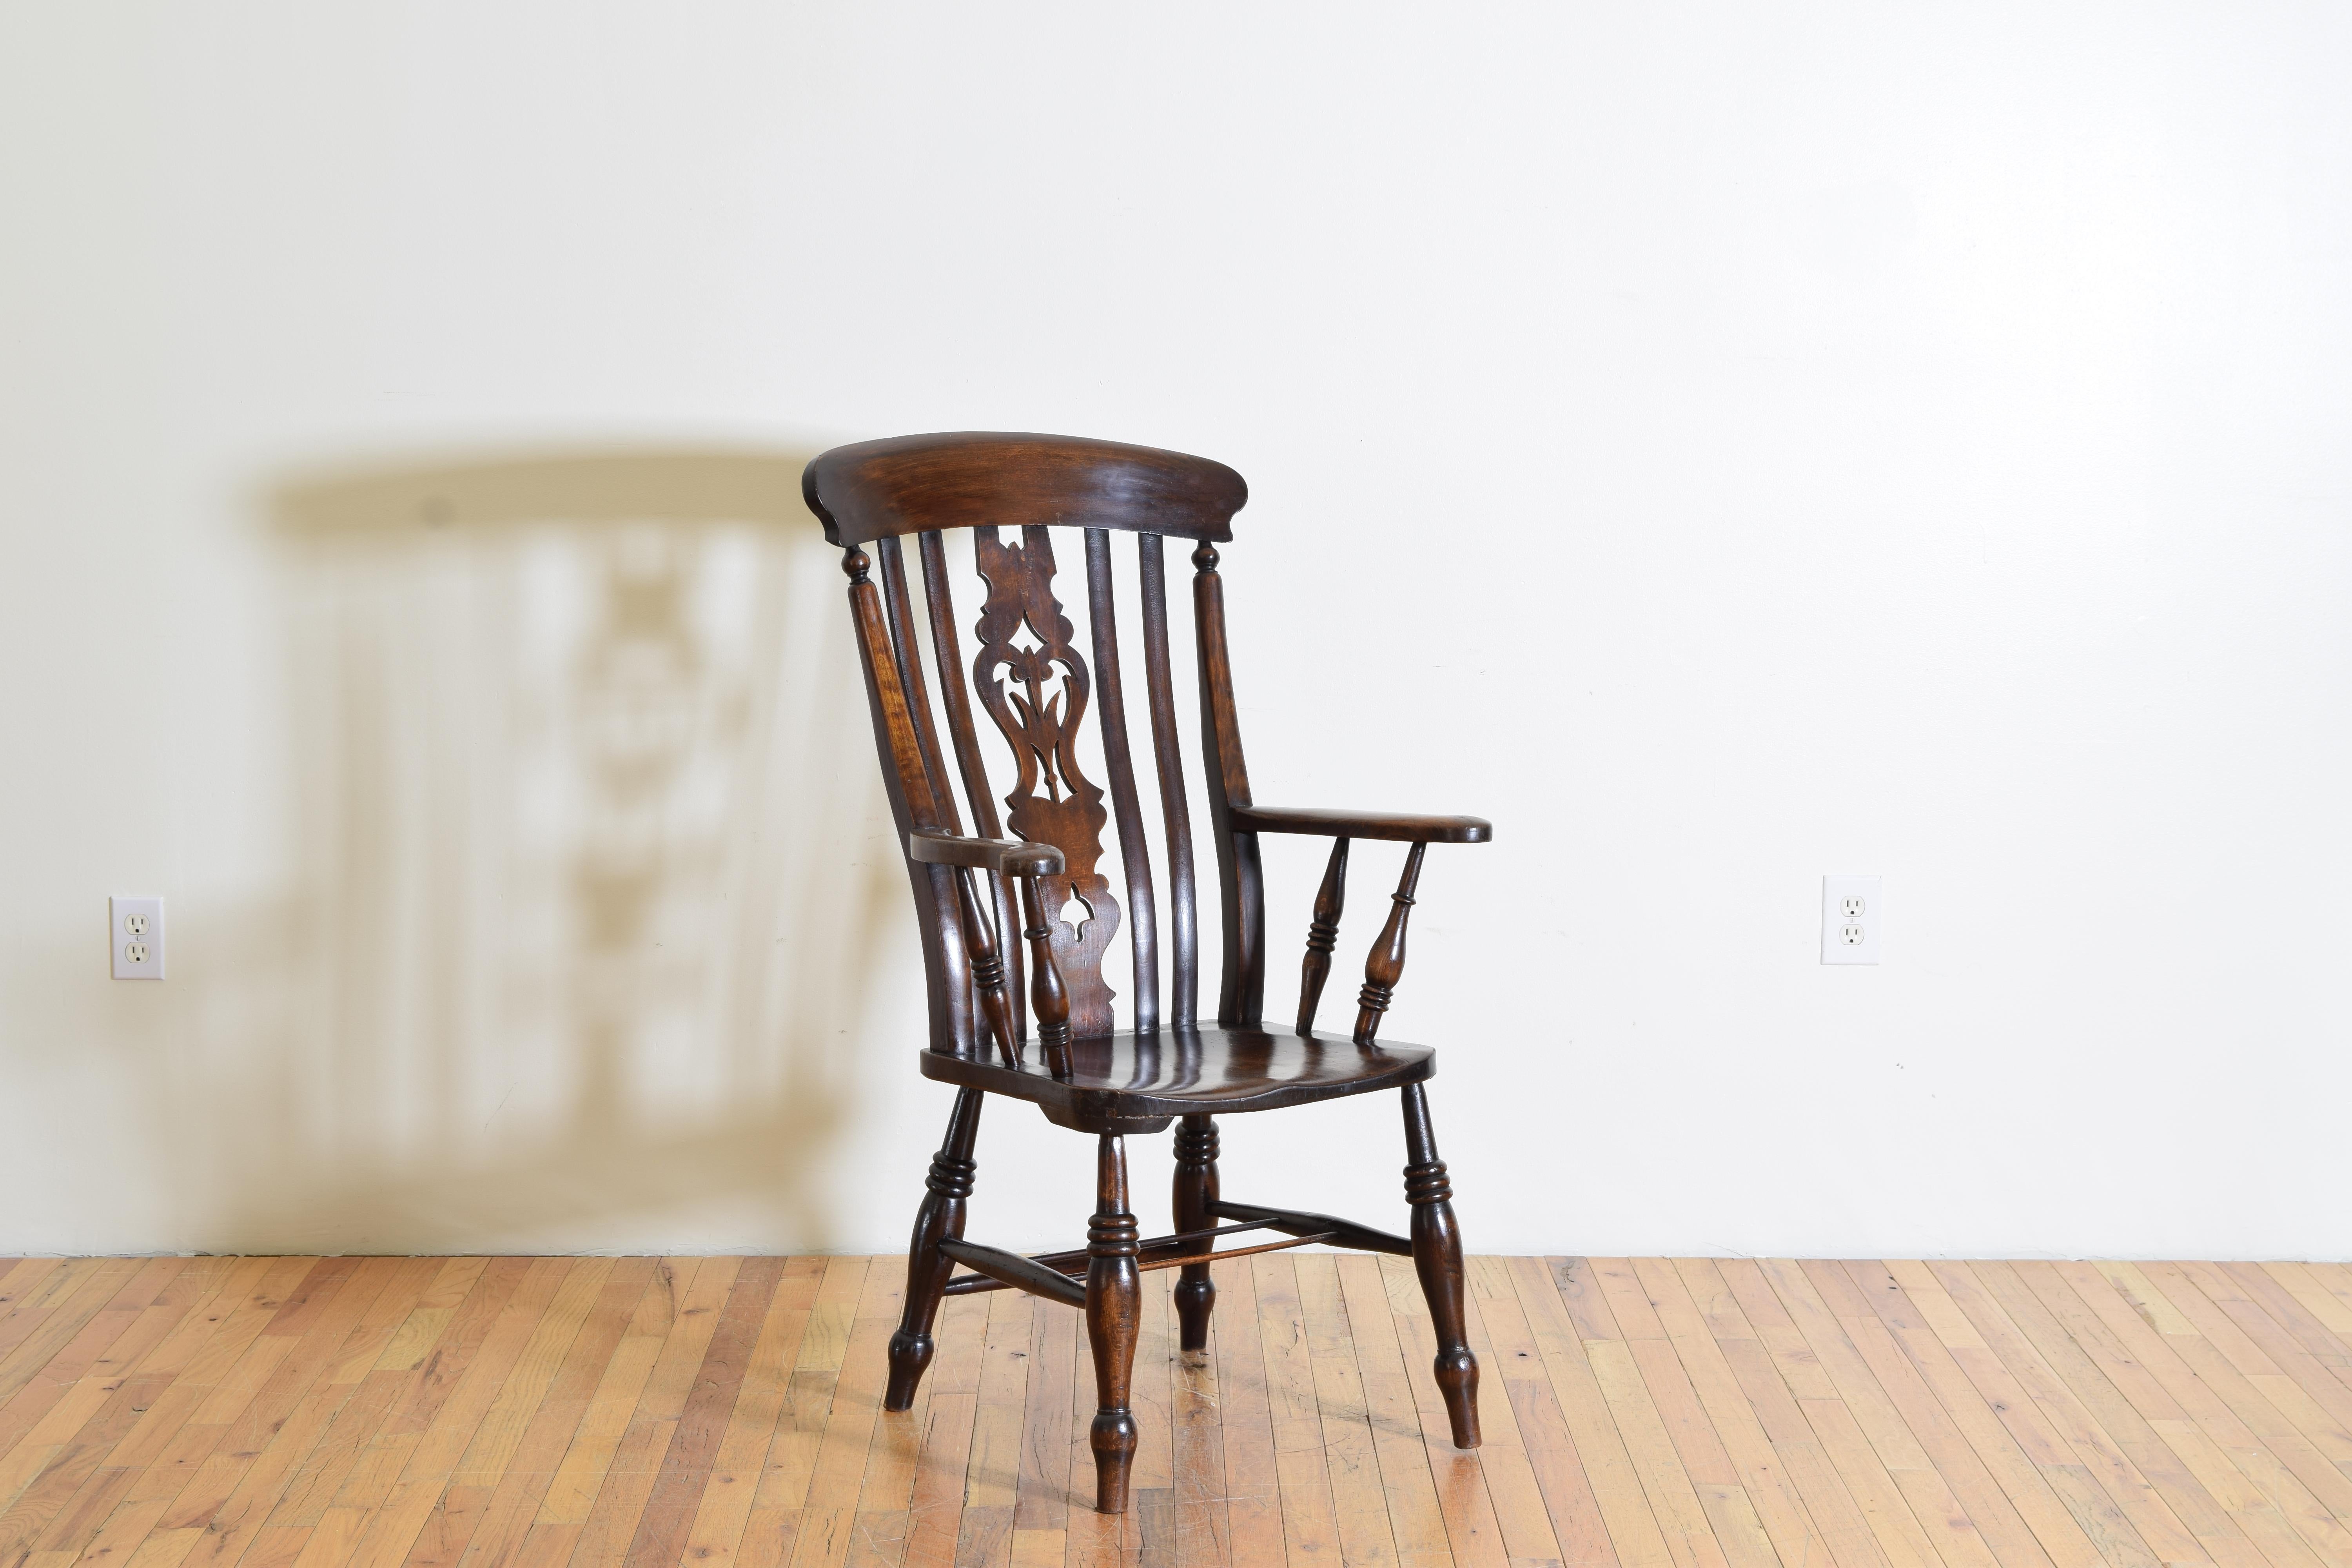 this lovely yew-wood chair from the 1st half of the 19th century has a shaped back with long vertical spindles on either side of a central back splat, with raised arms above a contoured seat, the seat raised on turned legs that are joined by slender